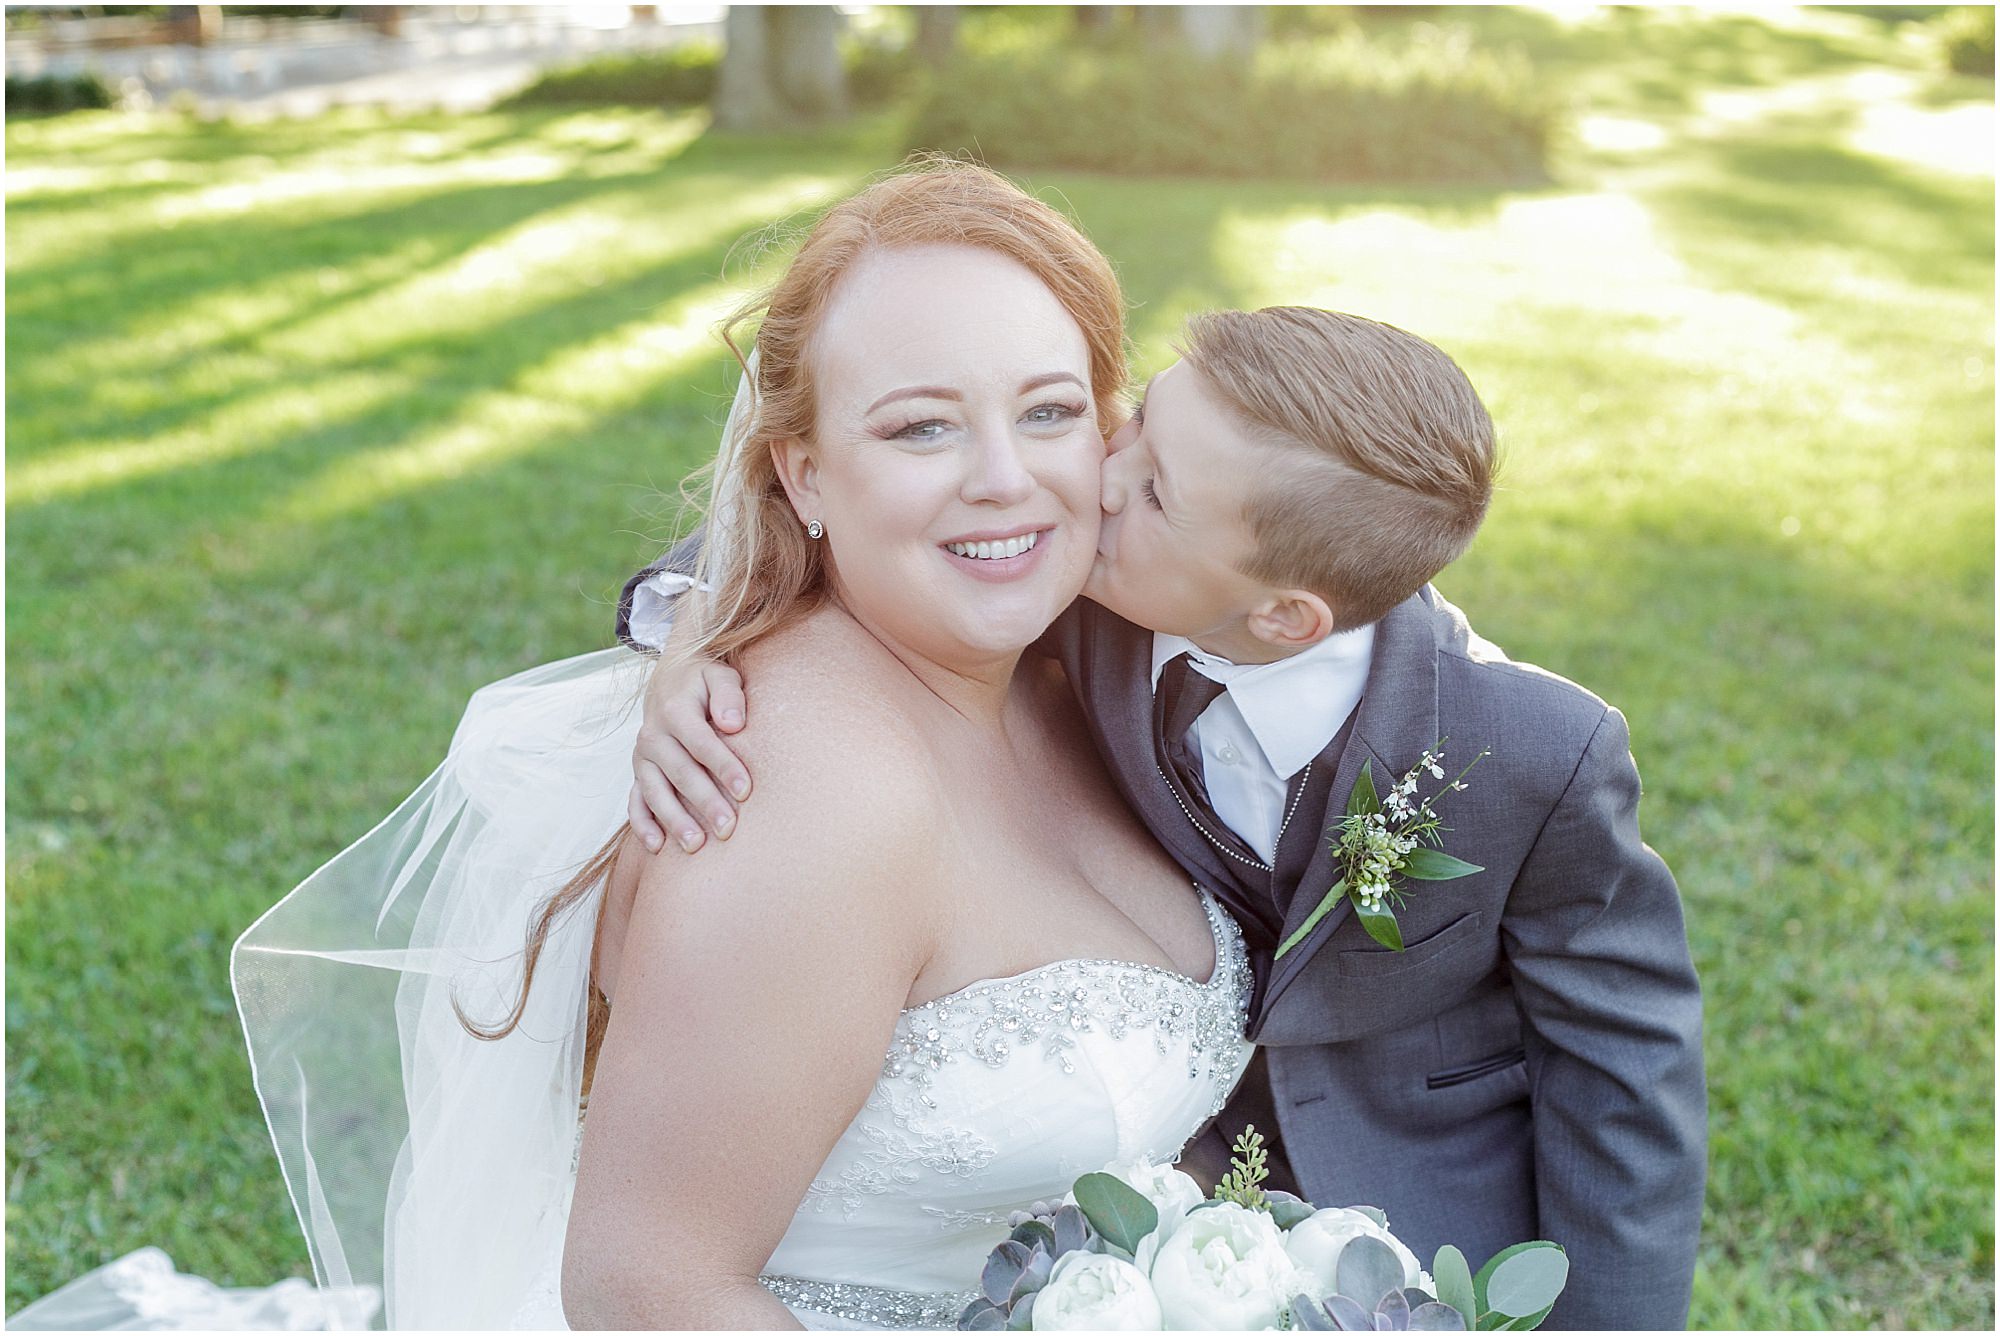 Brides son gives his mom a kiss on the cheek. 